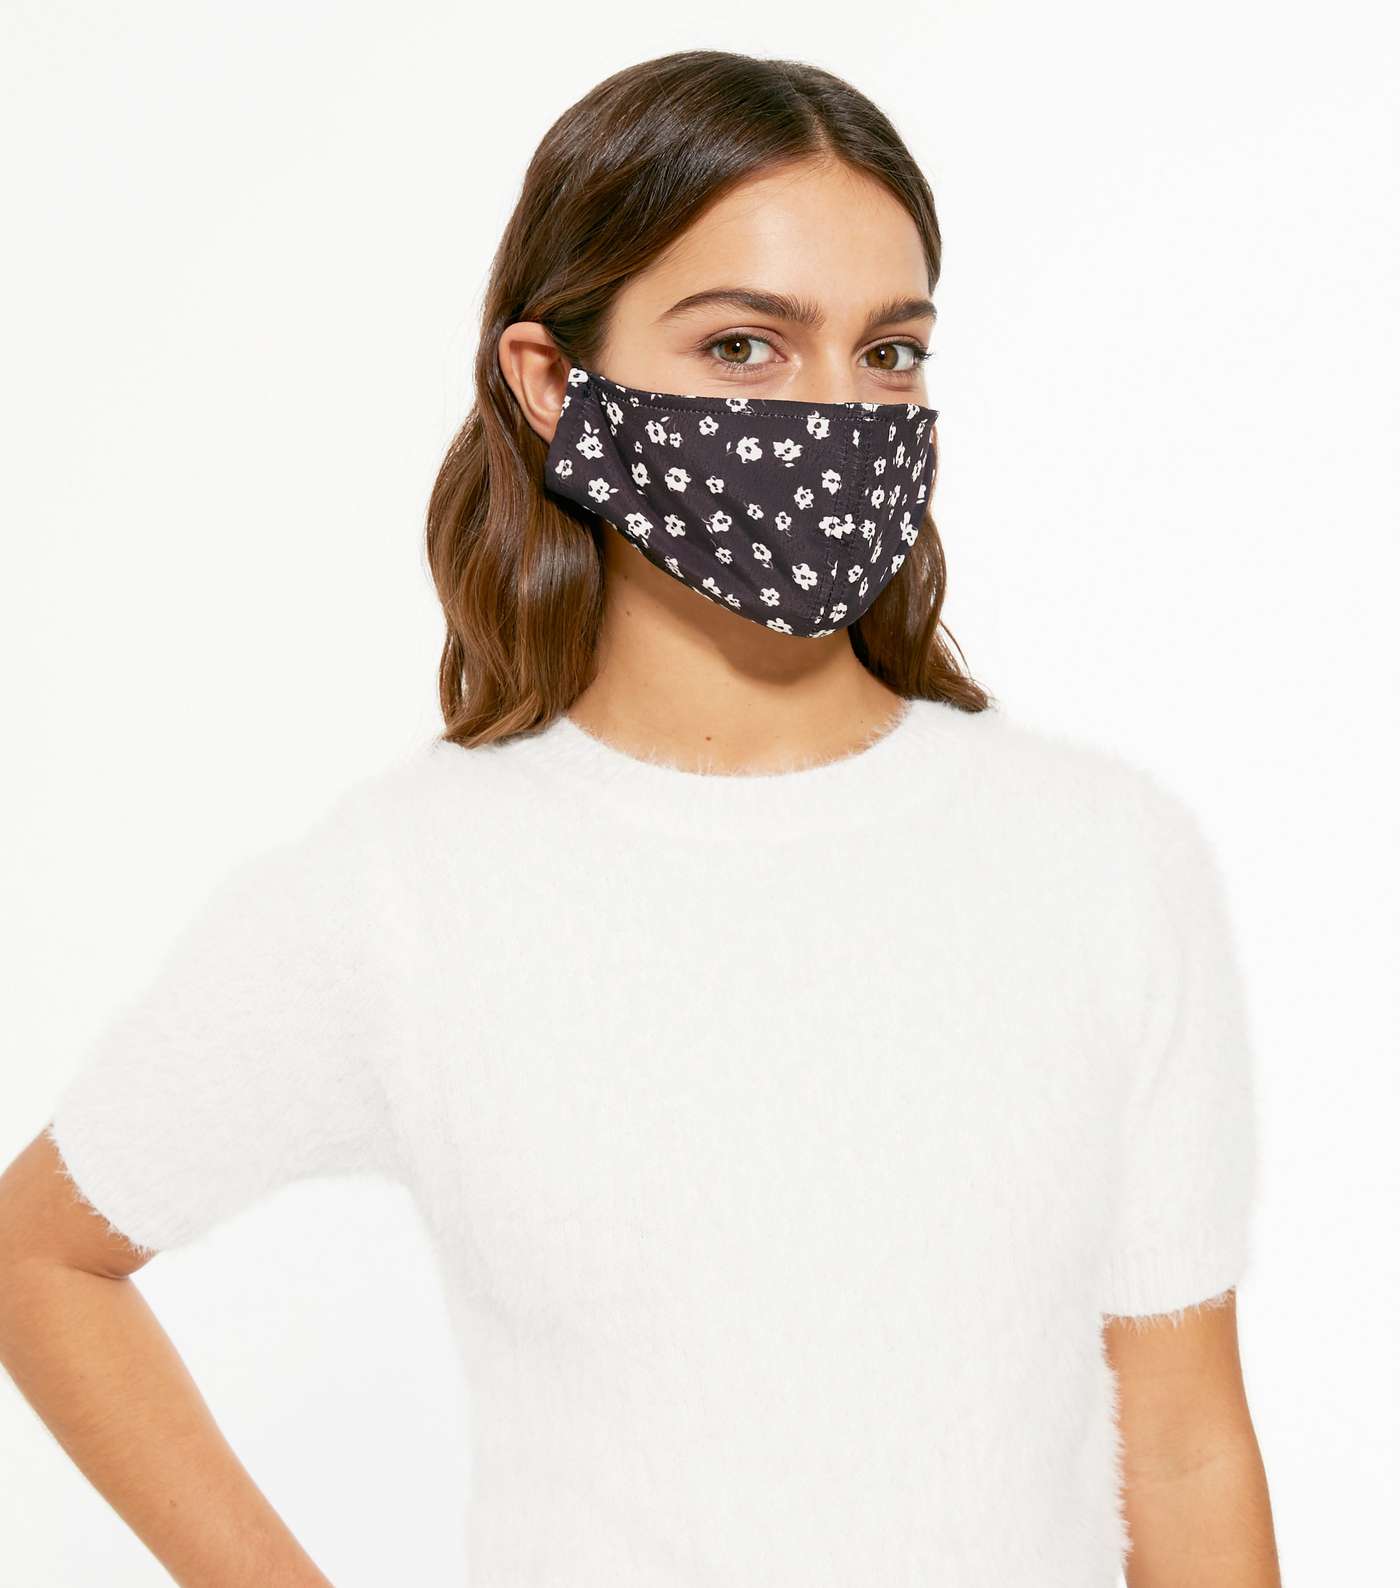 Black and White Ditsy Floral Reusable Face Covering